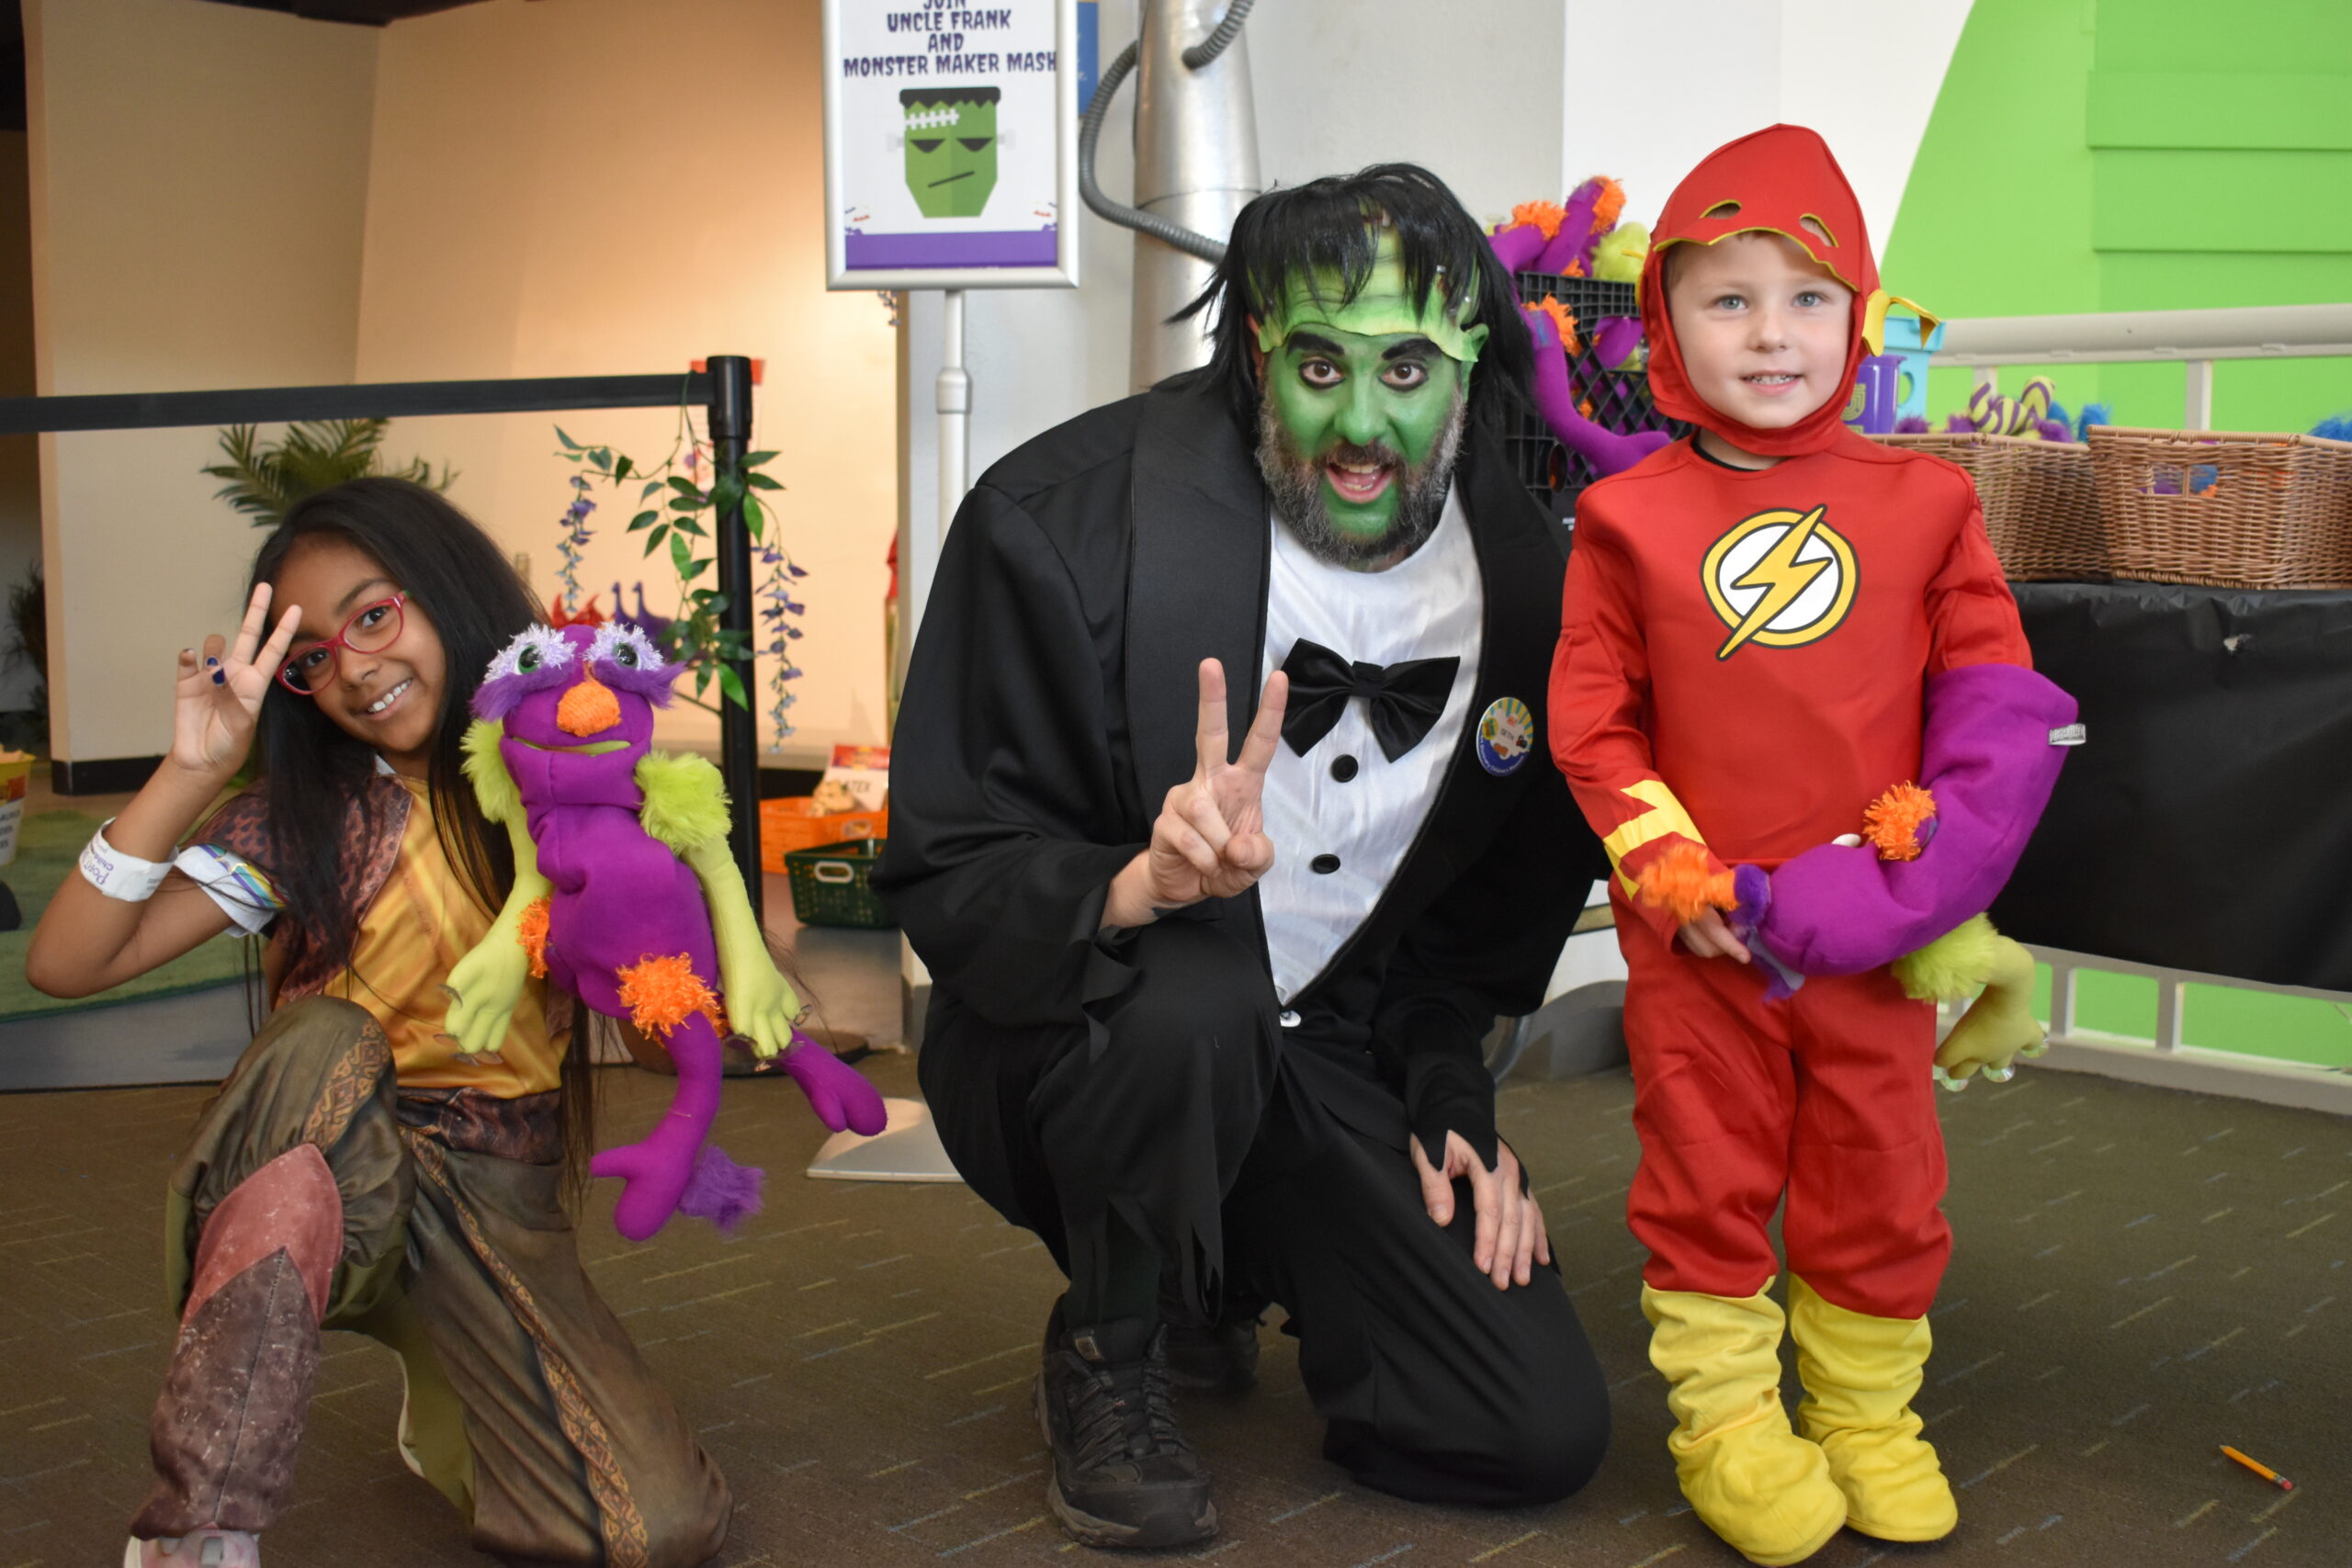 Group shot with two kids dressed in costumes with a staff member dressed as Frnakenstein